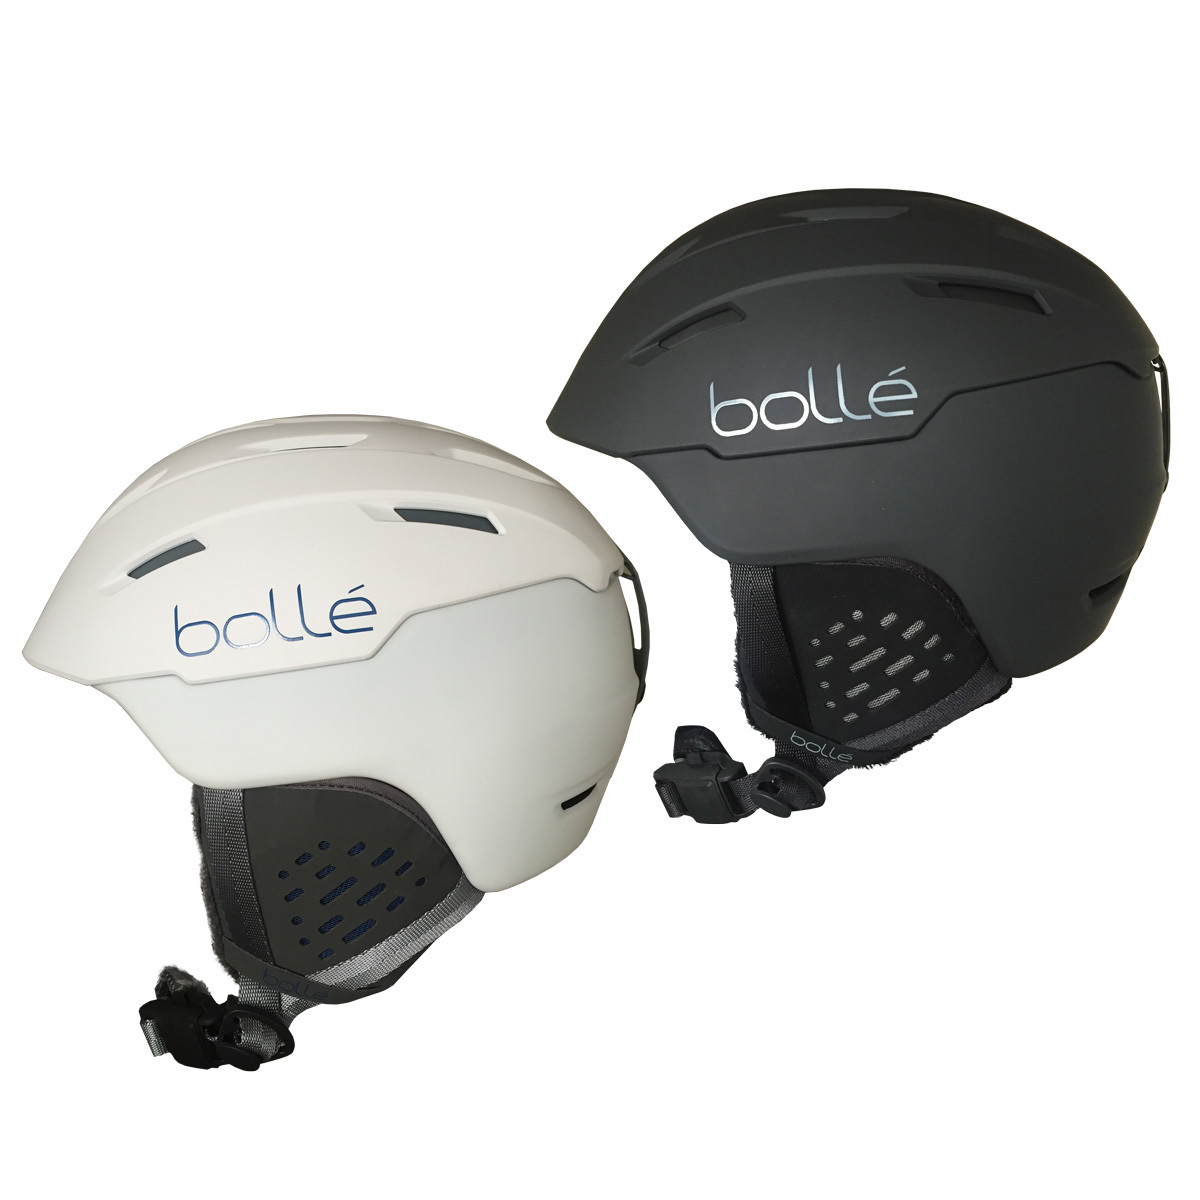 Bolle Vantage Ski Helmet in 2 Colours and 4 Sizes